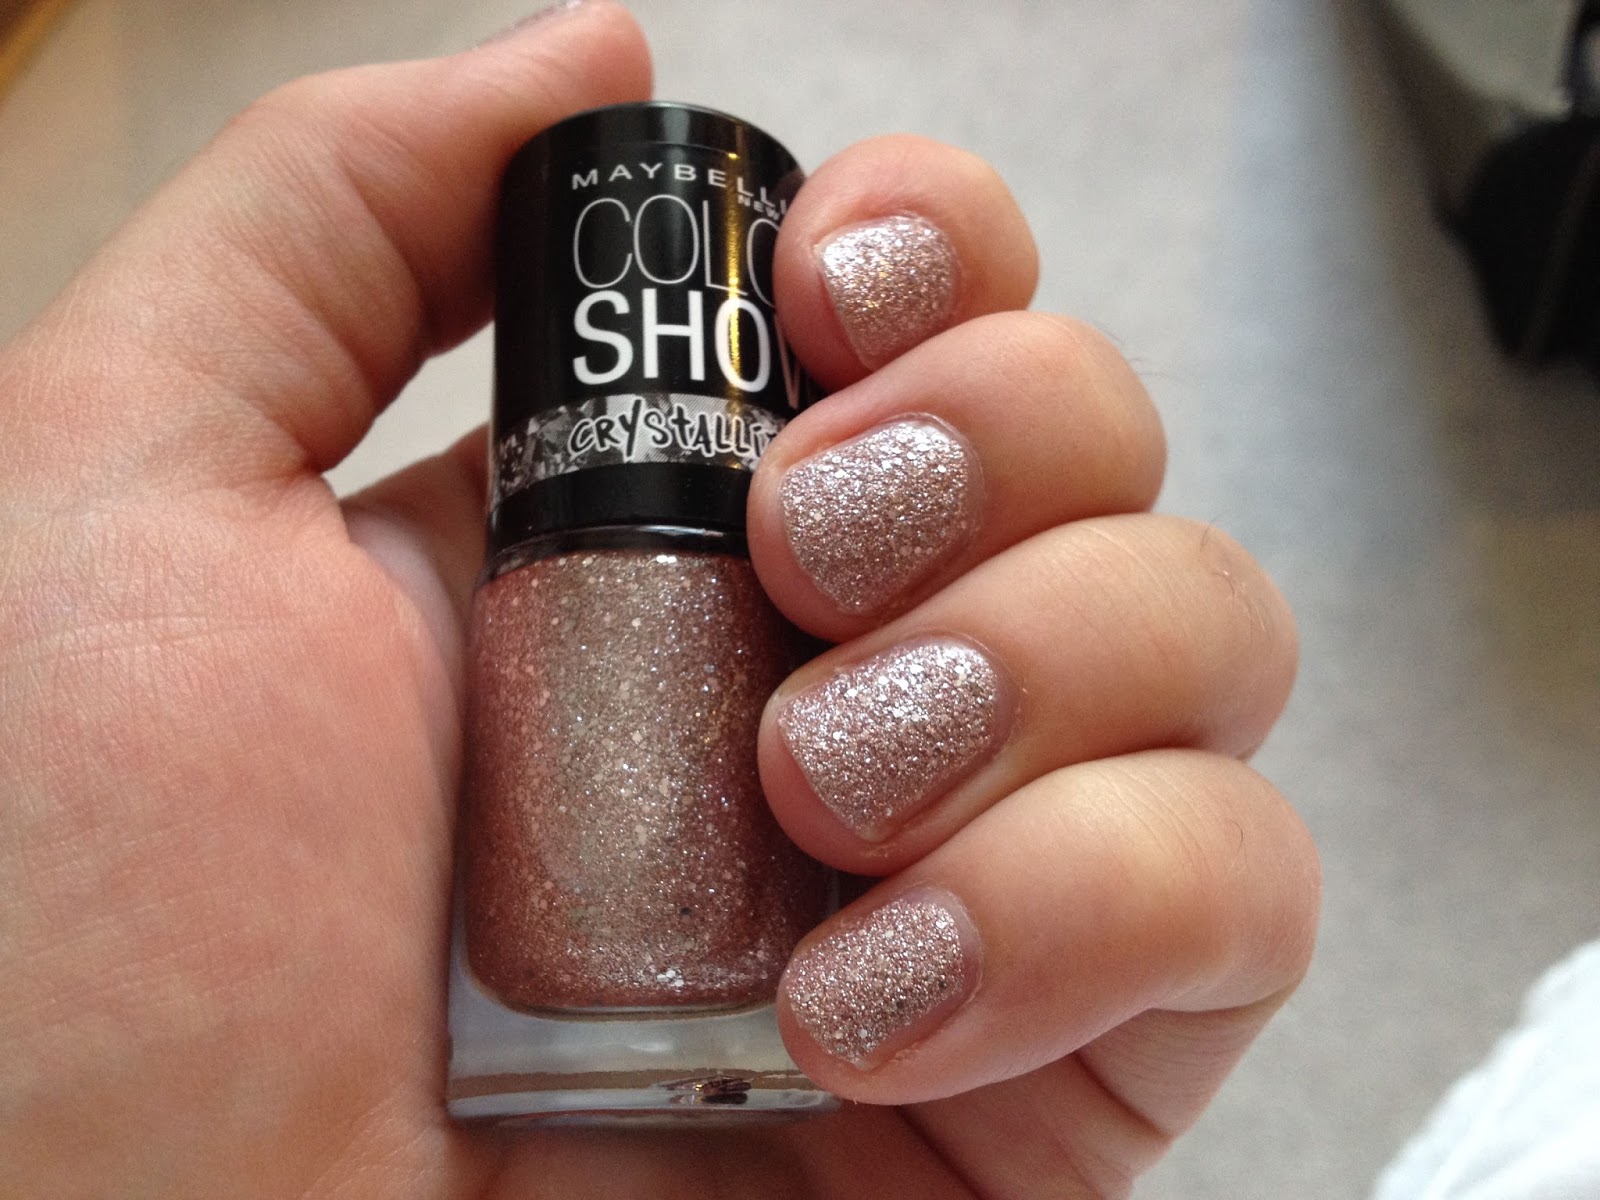 Maybelline Colorshow Glittermania Pink Champagne NOTD